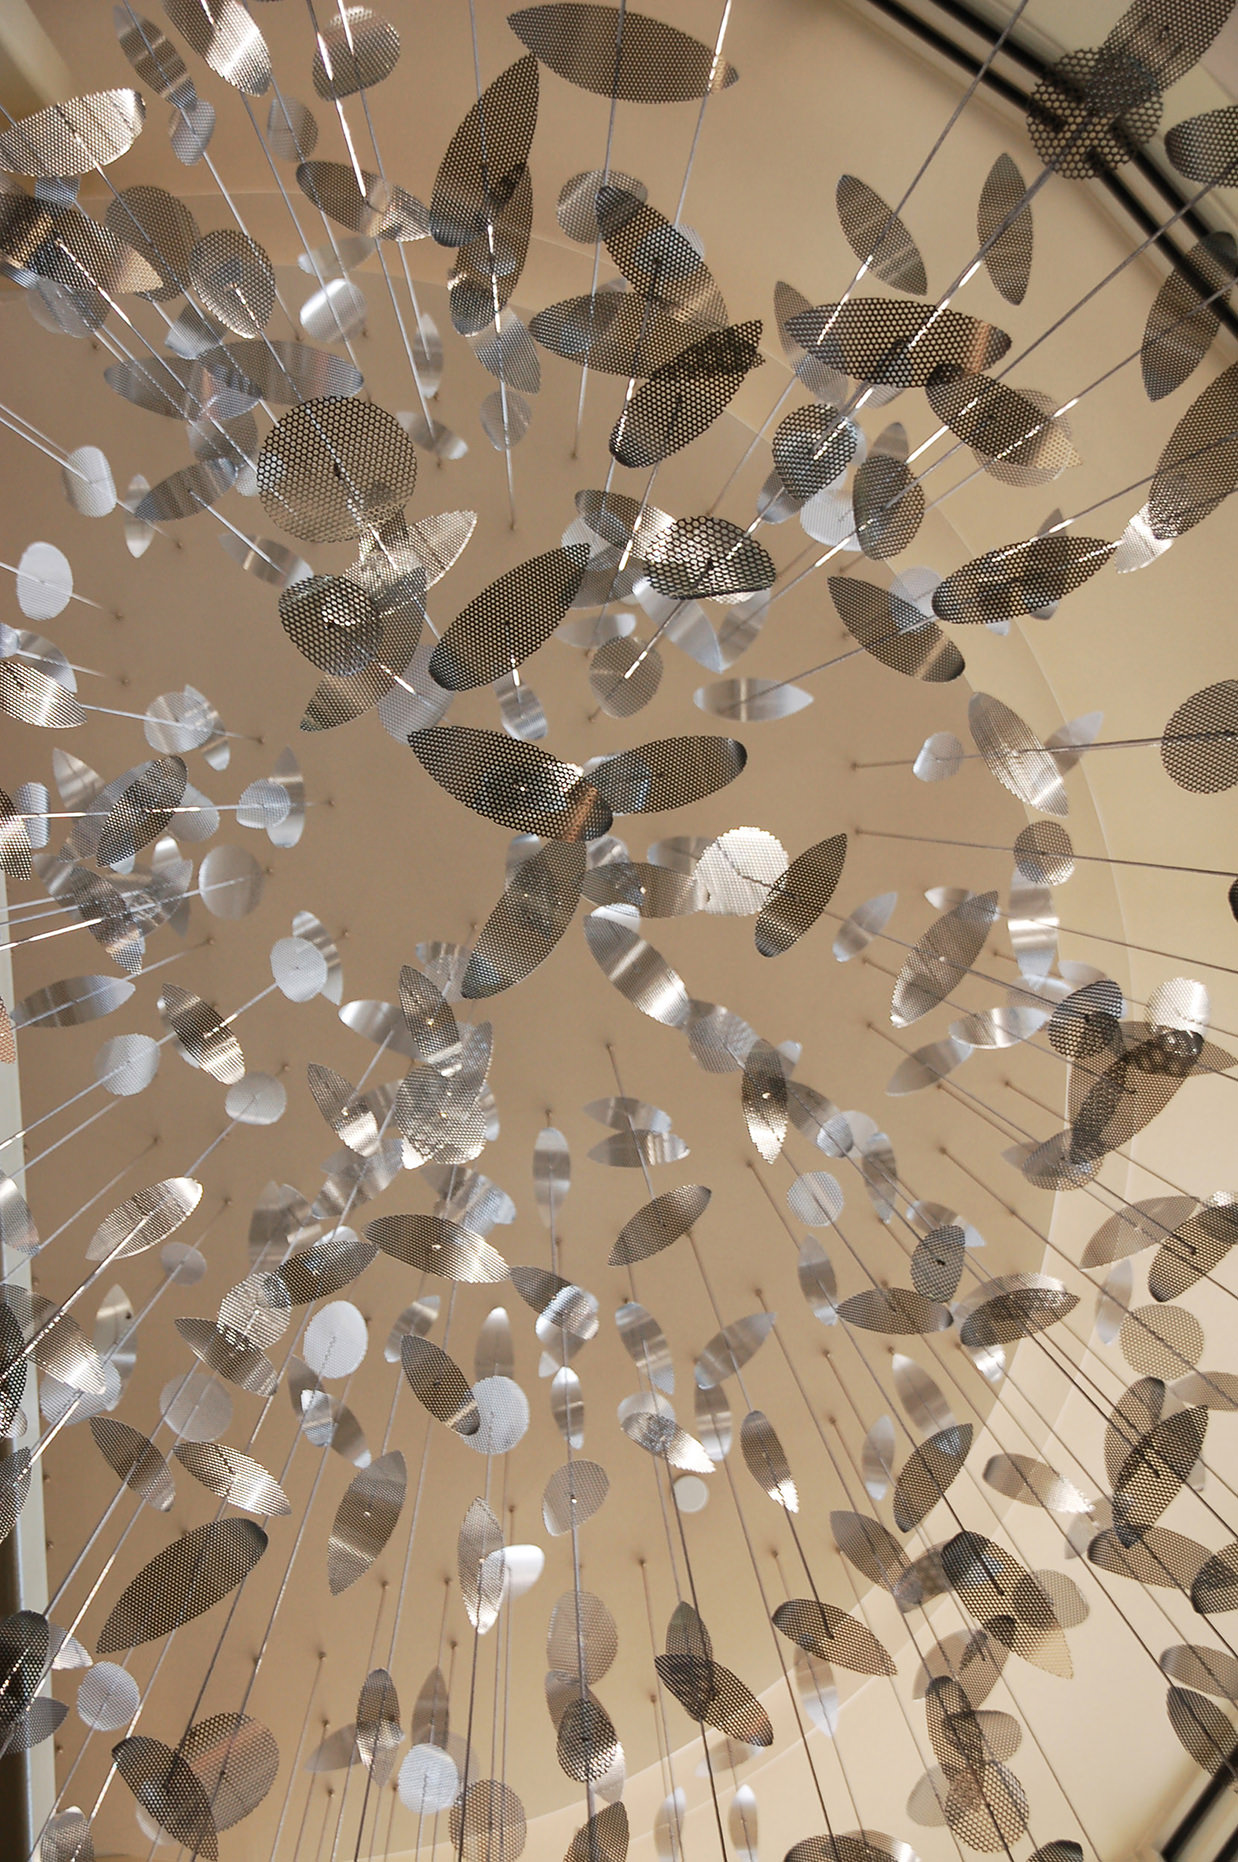 Silver curves come together to form Constellation II by Talley Fisher, inspired by hanging mobile art.